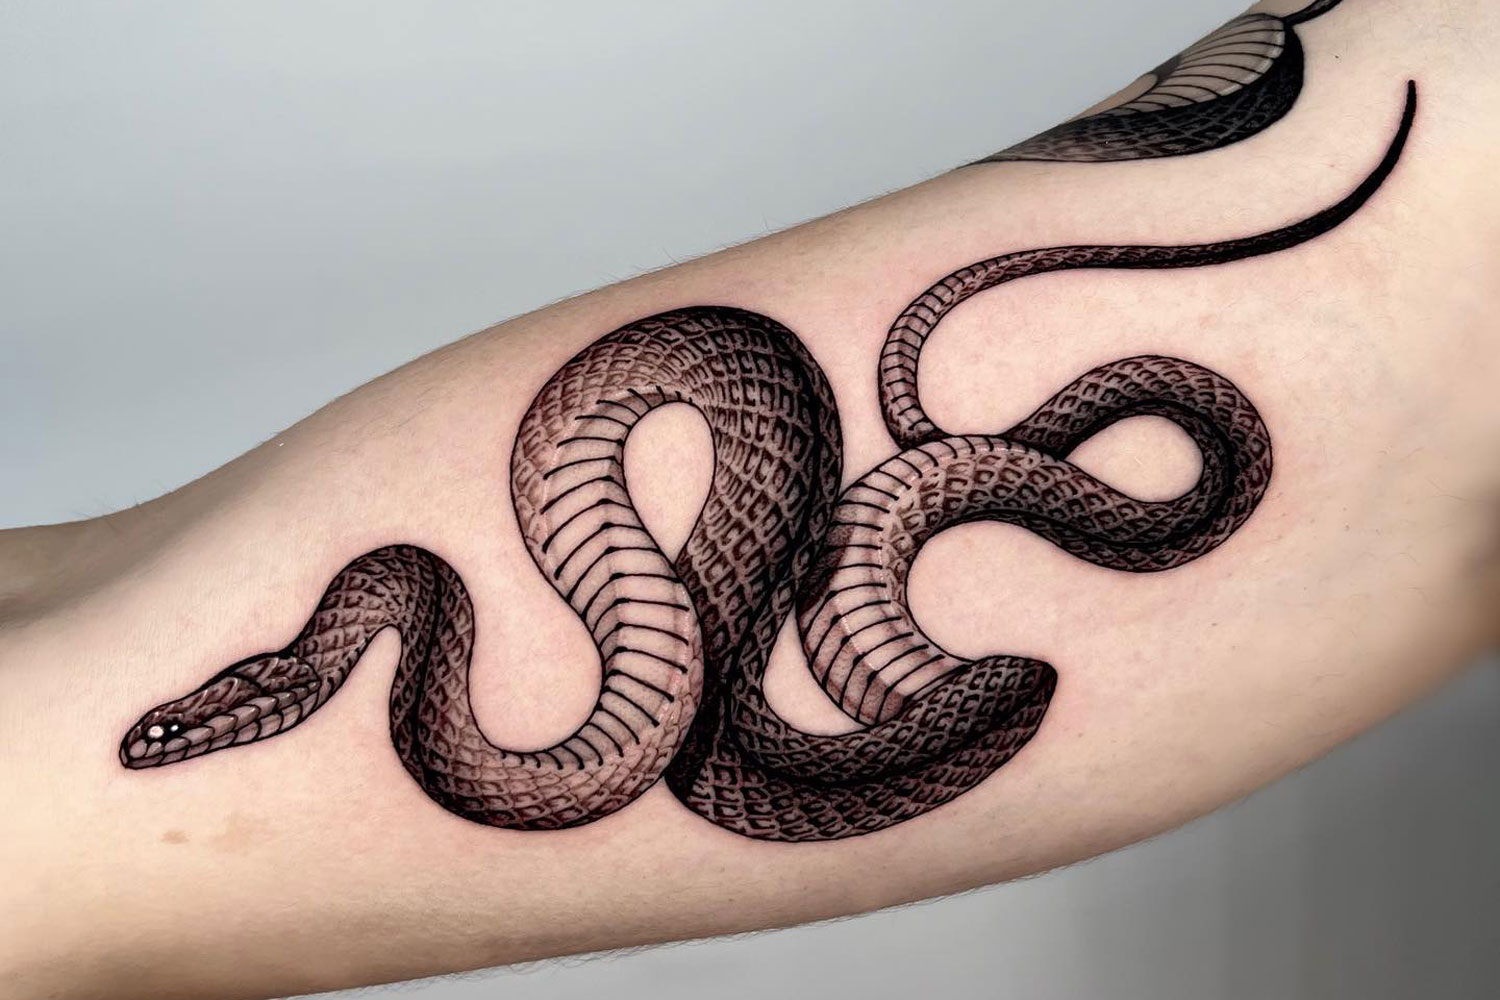 Japanese Snake tattoo men at theYoucom